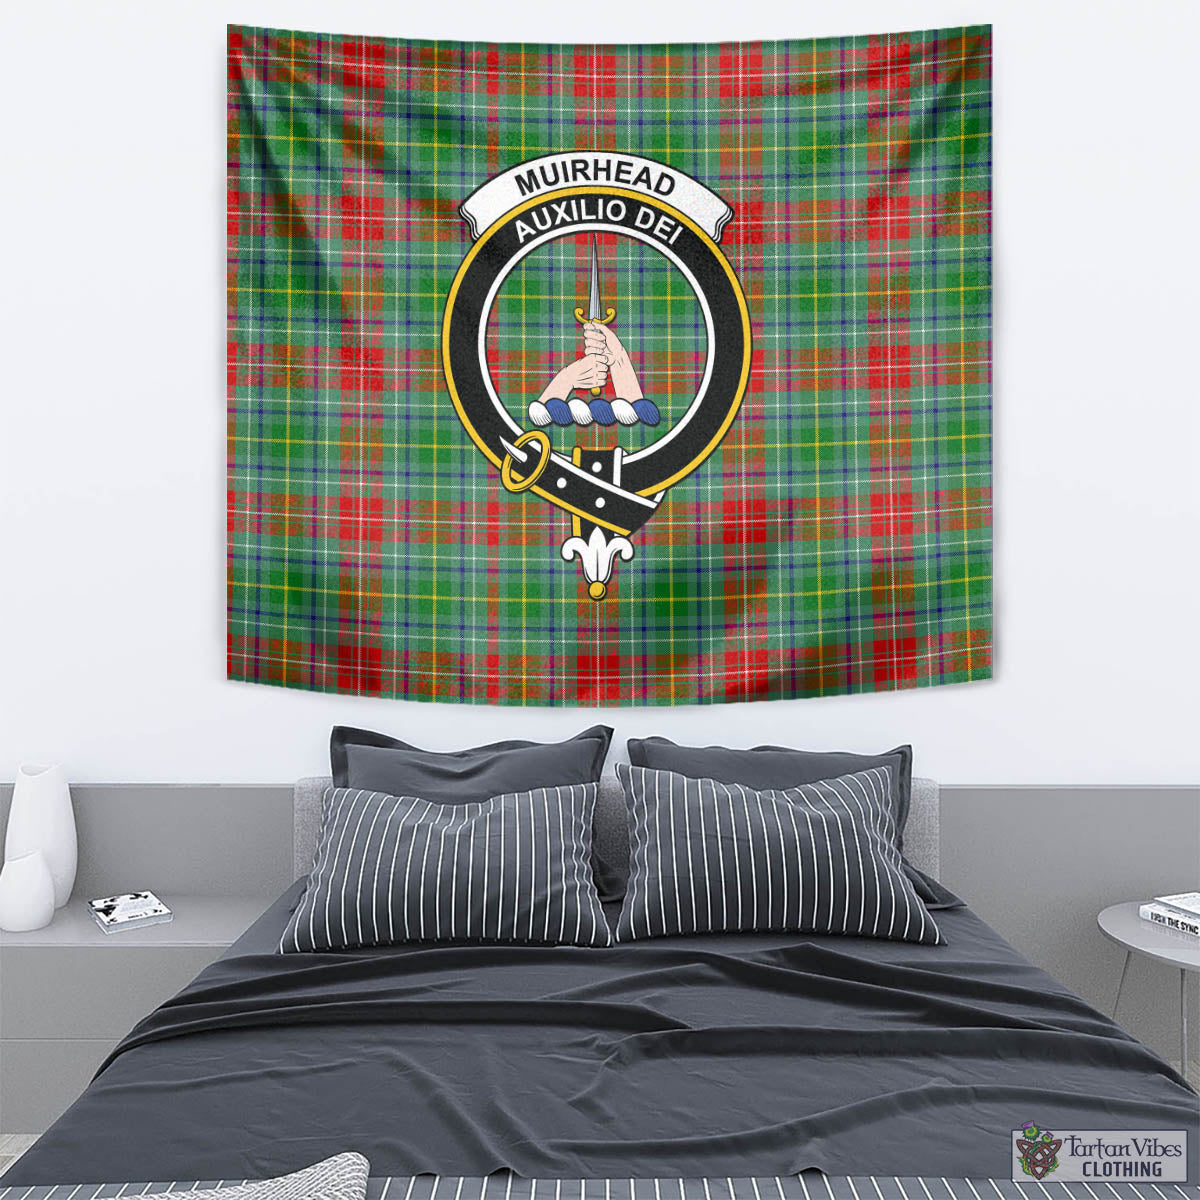 Tartan Vibes Clothing Muirhead Tartan Tapestry Wall Hanging and Home Decor for Room with Family Crest